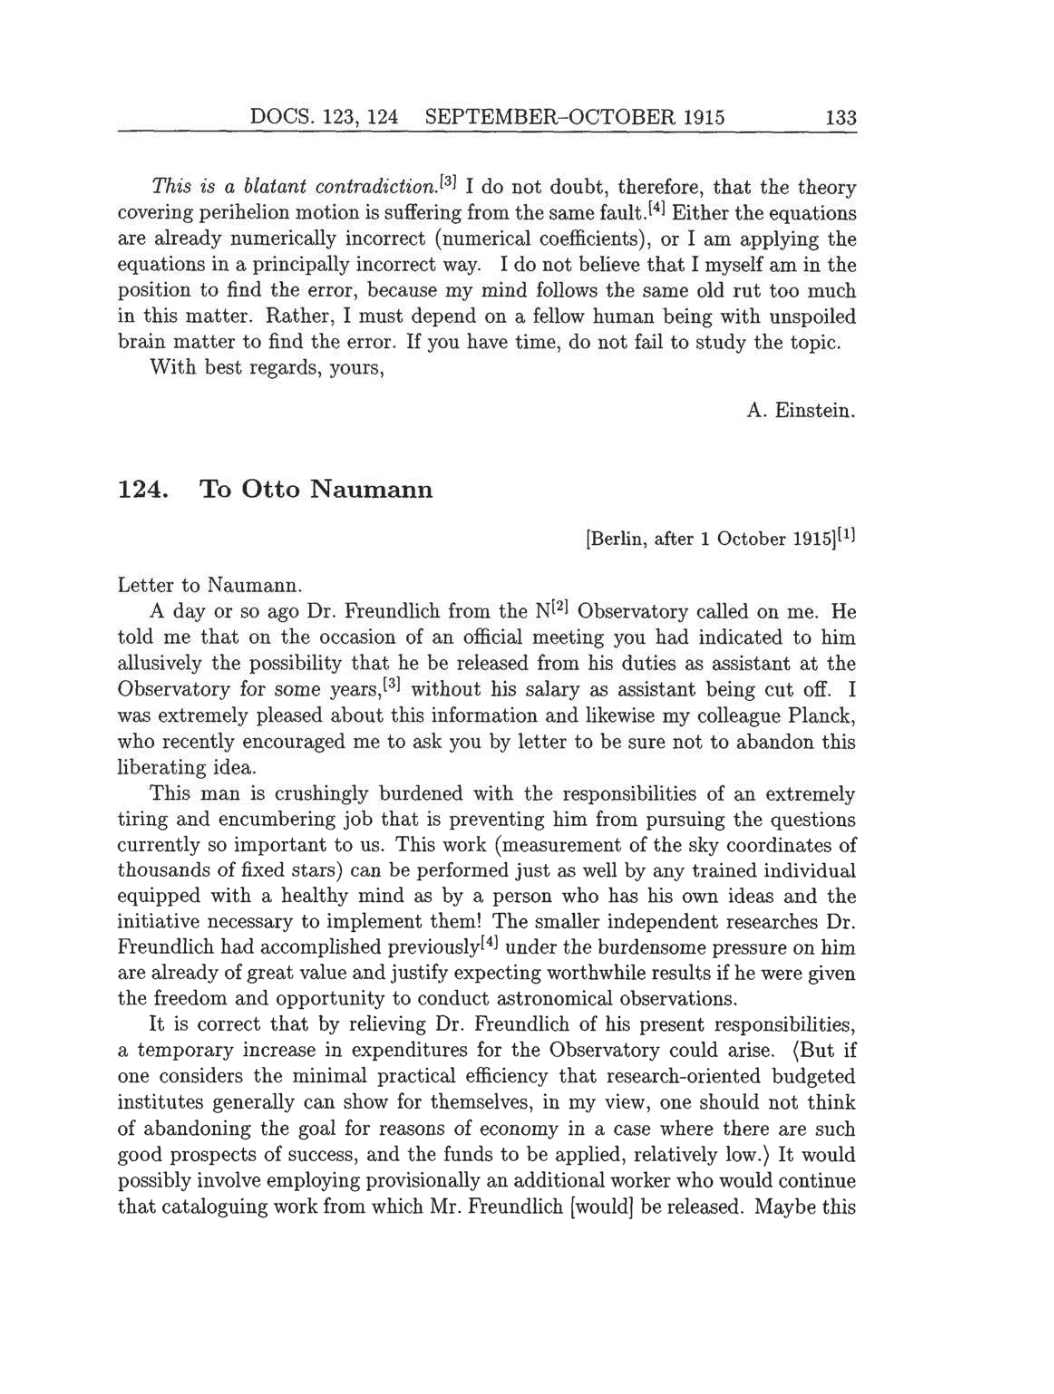 Volume 8: The Berlin Years: Correspondence, 1914-1918 (English translation supplement) page 133